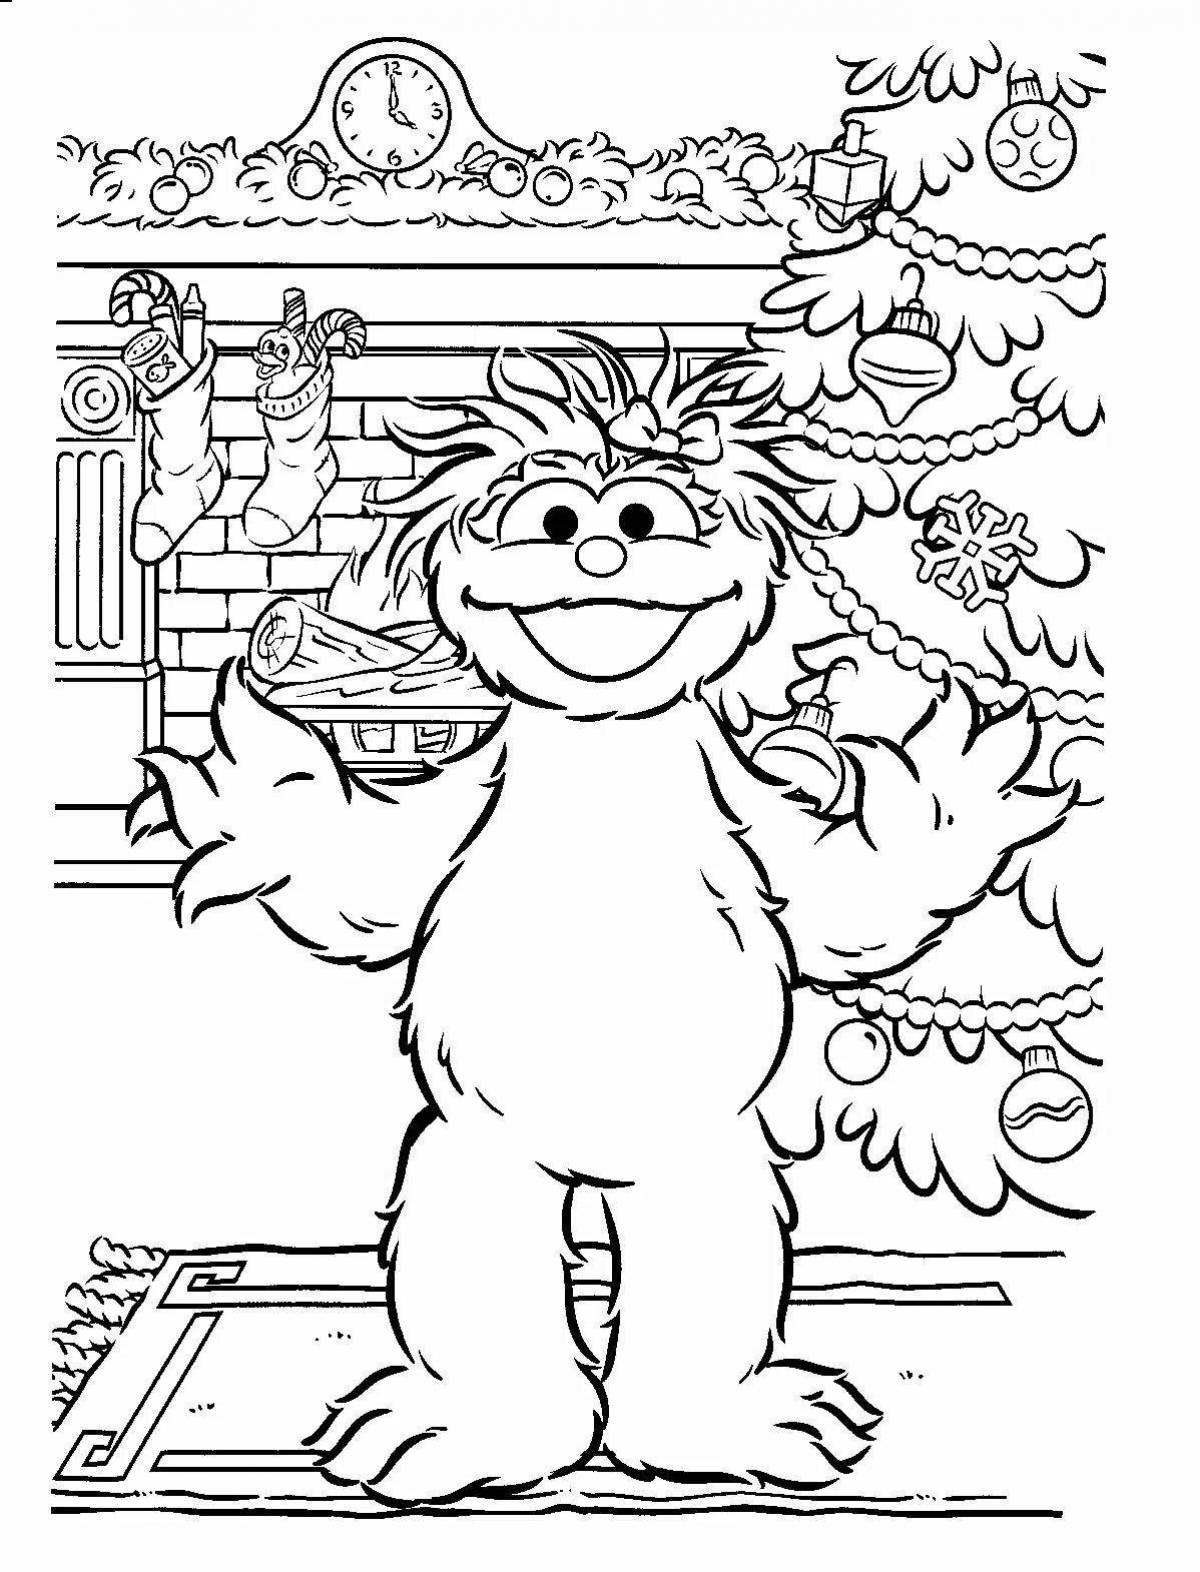 Sesame Street coloring pages